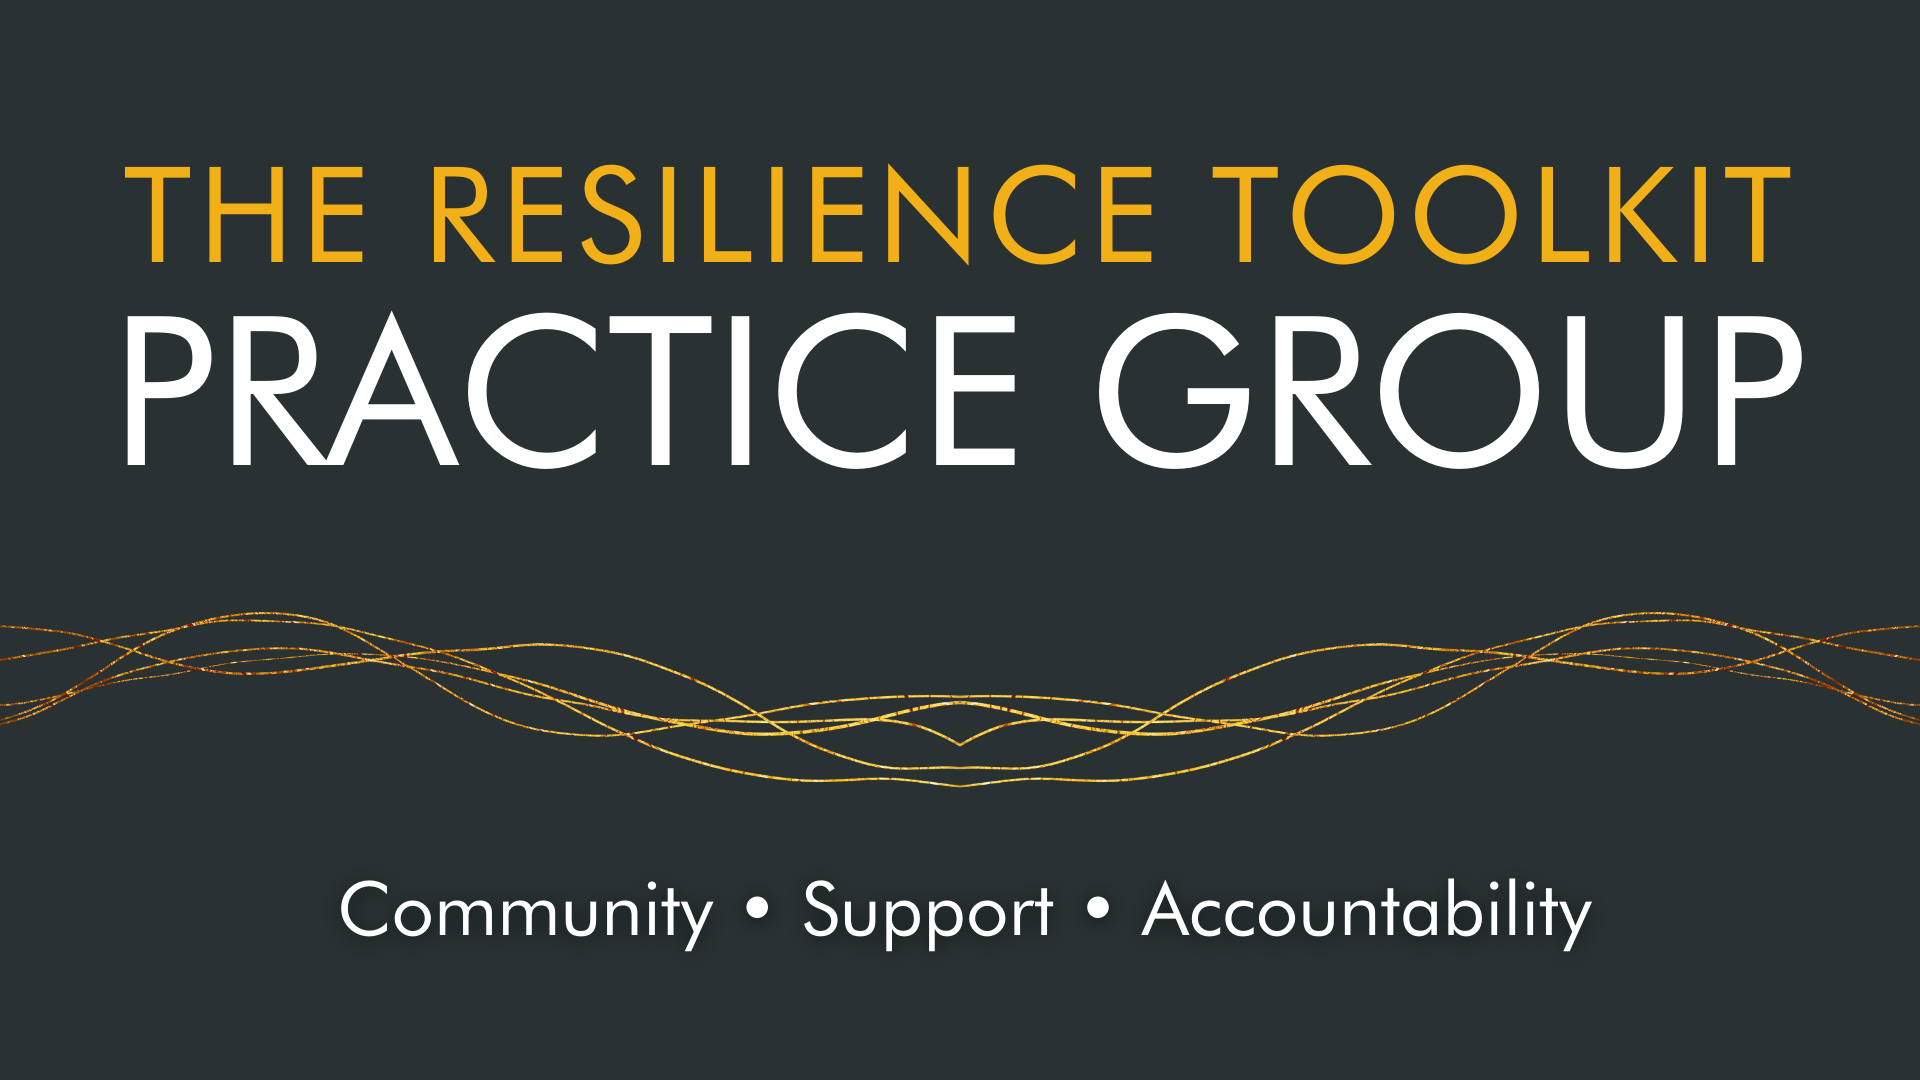 The Resilience Toolkit Practice Group - Community. Support. Accountability.